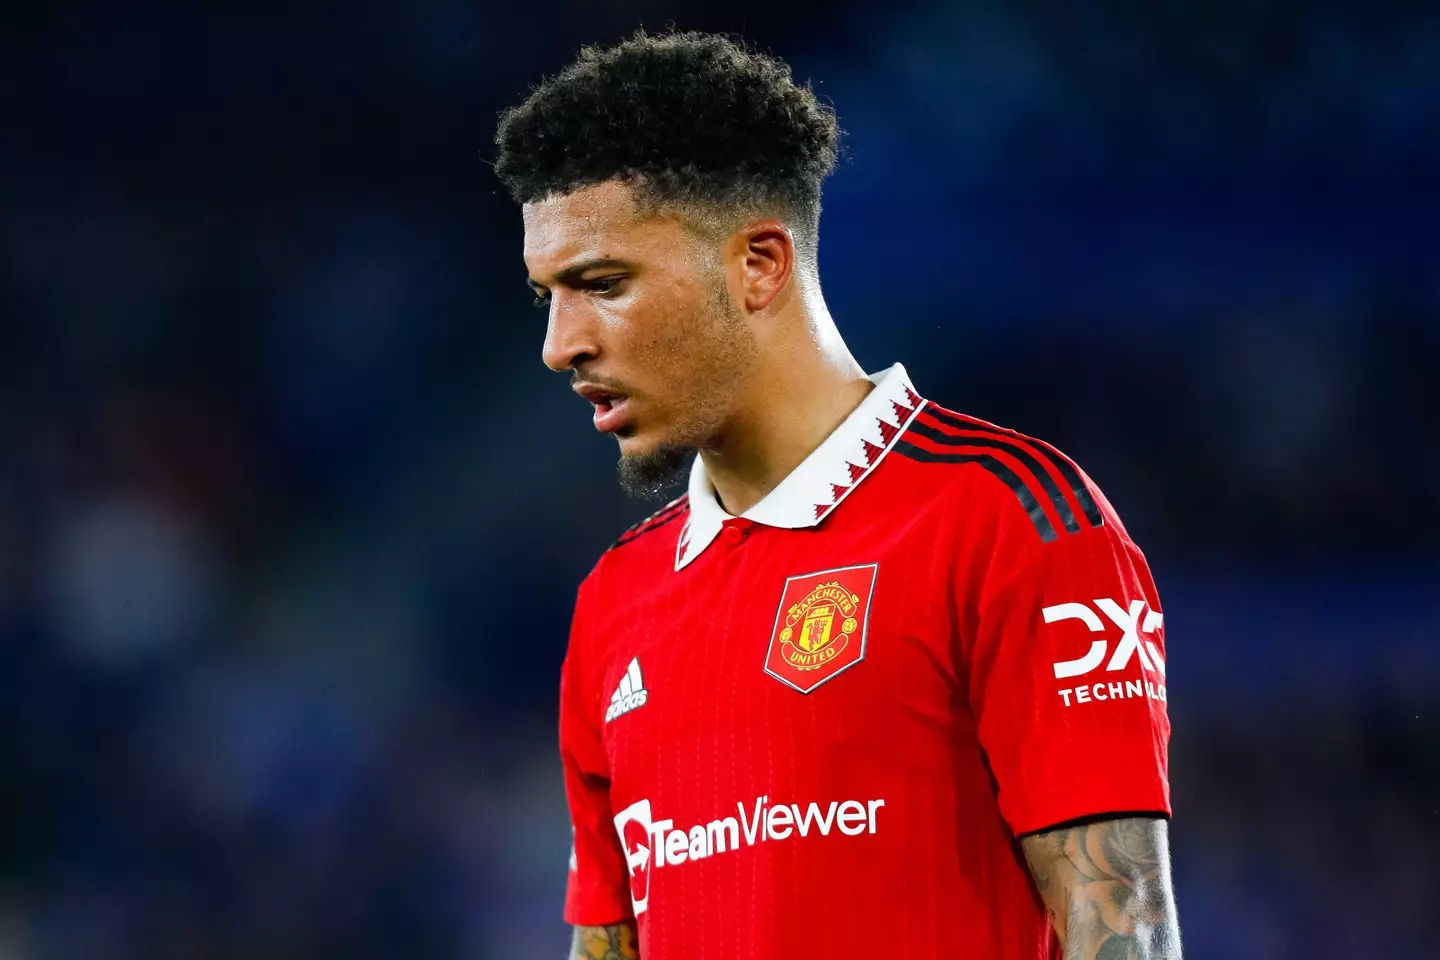 Jadon Sancho has been ranked as the most influential English player on Instagram (Image: Alamy)